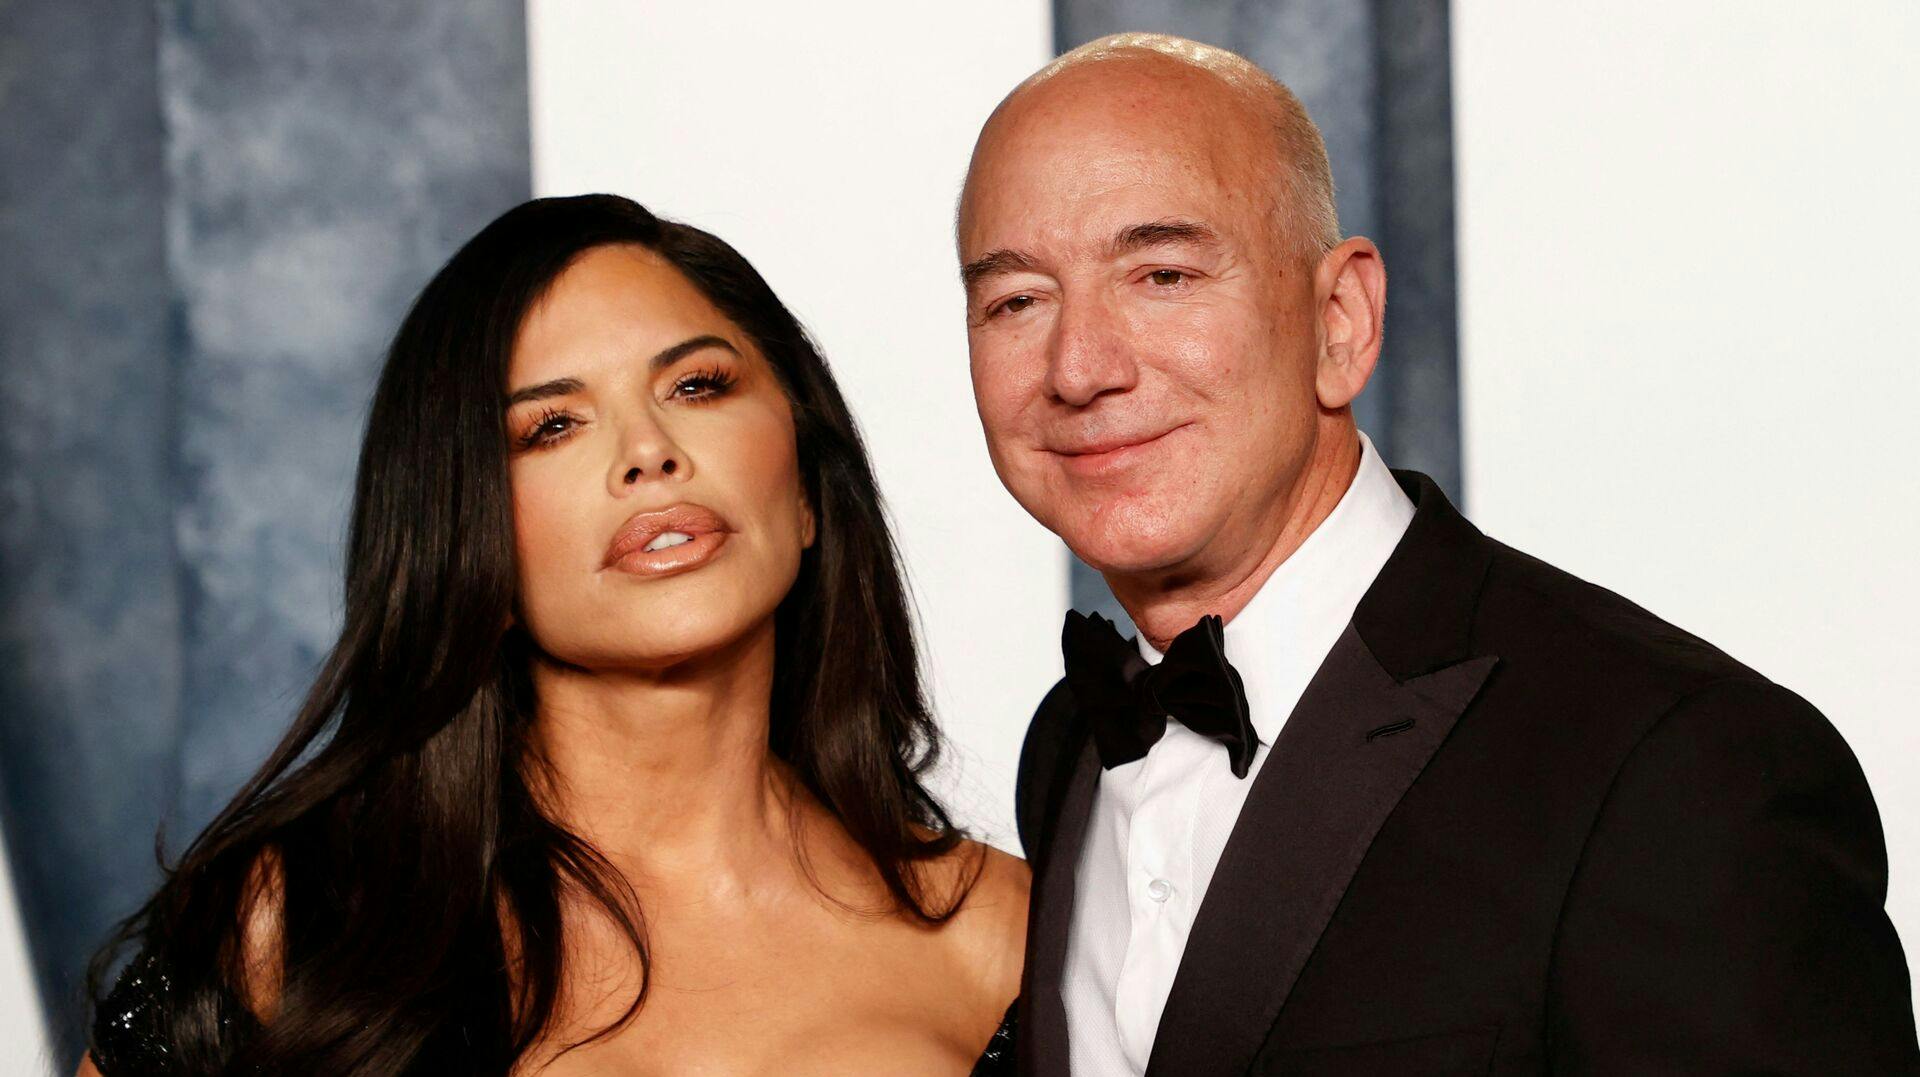 Amazon Founder and Executive Chair Jeff Bezos and Lauren Sanchez attend the Vanity Fair 95th Oscars Party at the The Wallis Annenberg Center for the Performing Arts in Beverly Hills, California on March 12, 2023. (Photo by Michael TRAN / AFP)